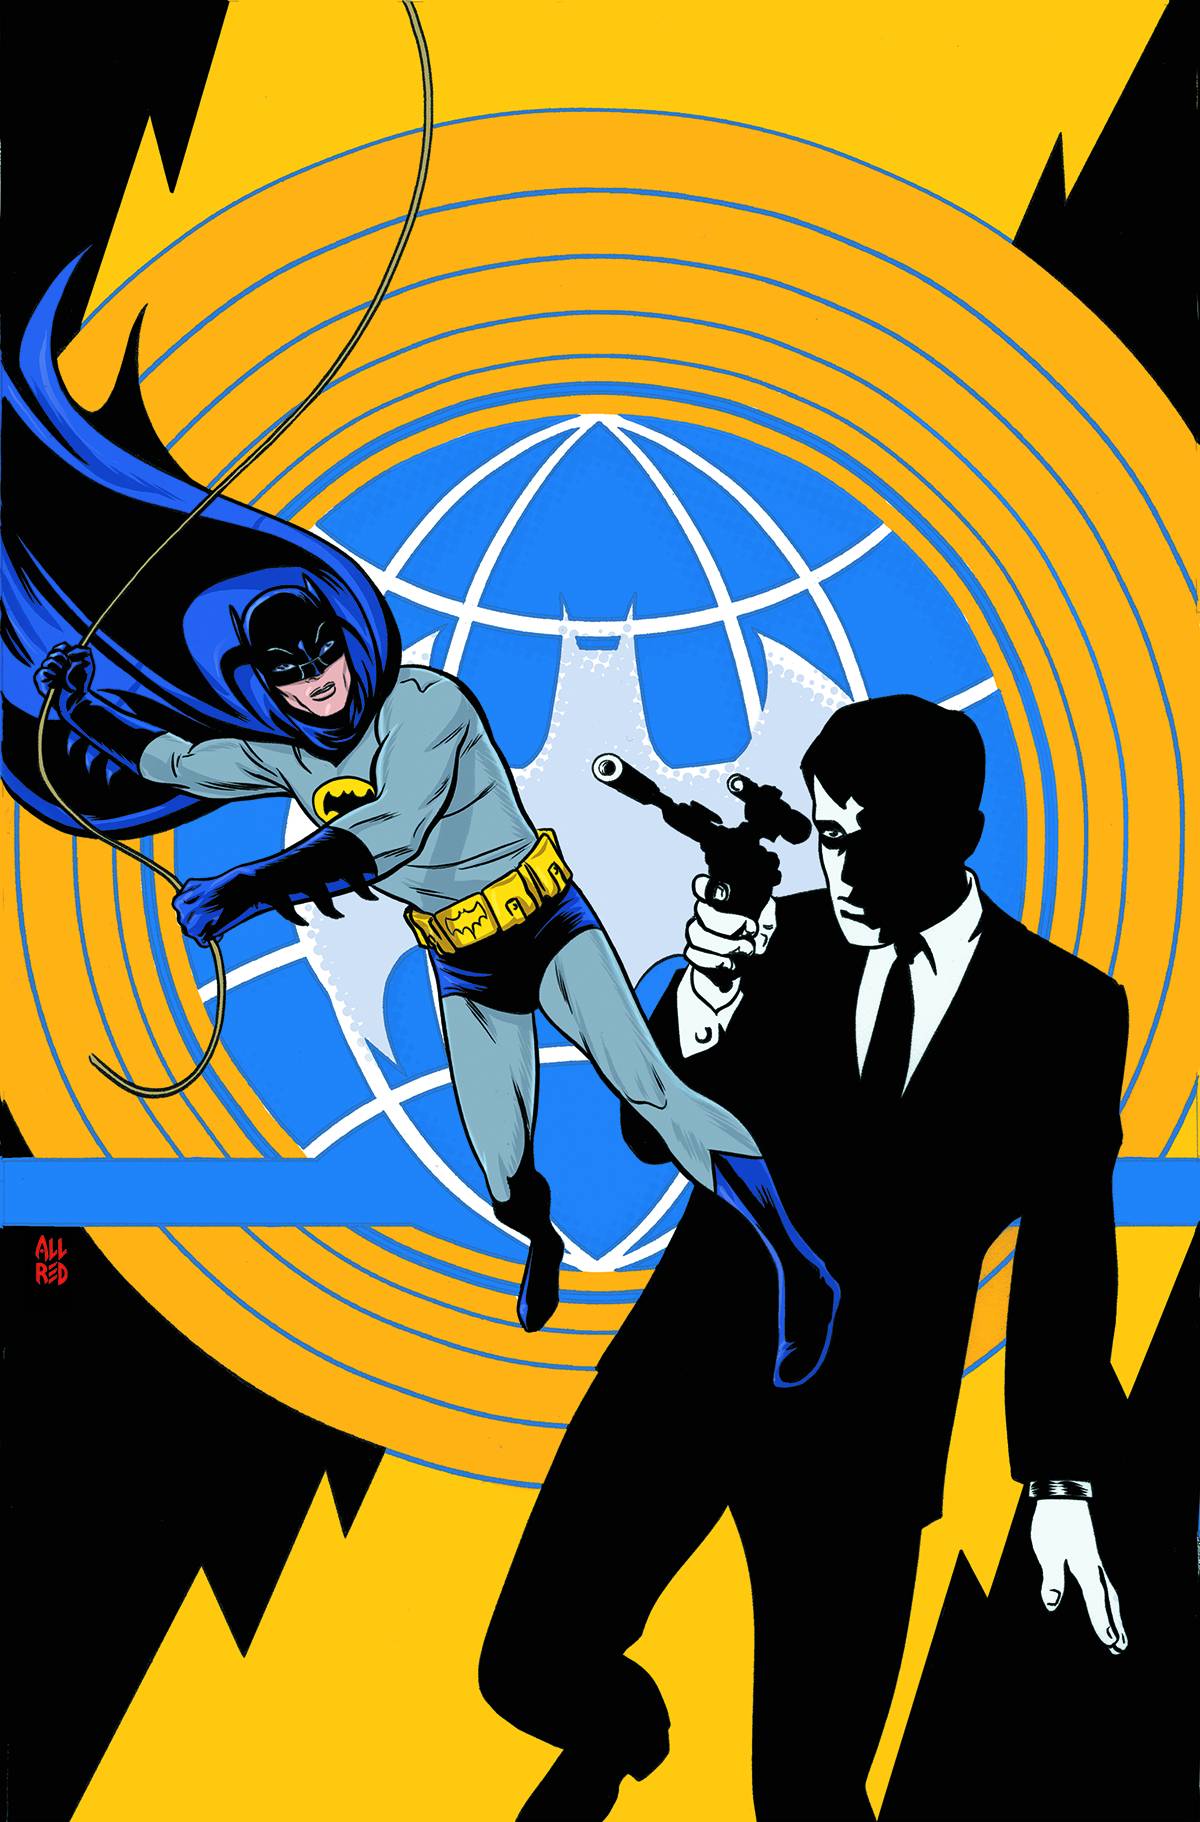 Batman 66 Meets the Man From Uncle #1